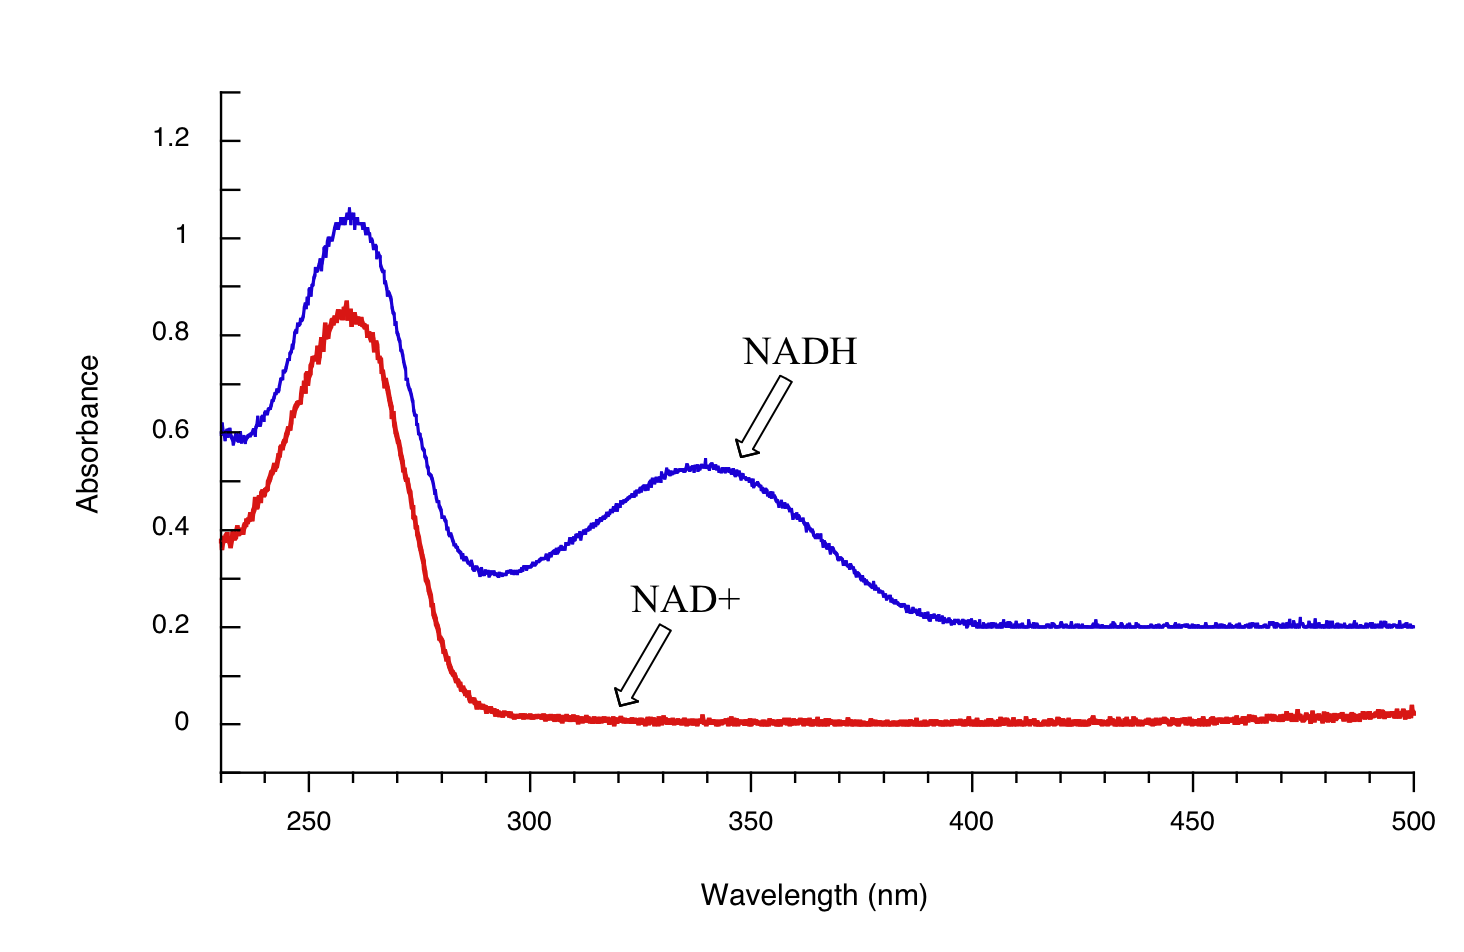 Graph of absorbance vs wavelength comparing NADH (blue, top) and NAD+ (red, bottom). NADH starts at an absorbance of 0.6 and peaks to 1.1 around 260 nanometers. Second peak around 340 nanometers to an absorbance of 0.7. NAD+ starts at an absorbance of 0.4 and peaks to 0.8 around 260 nanometers. No second peak. 